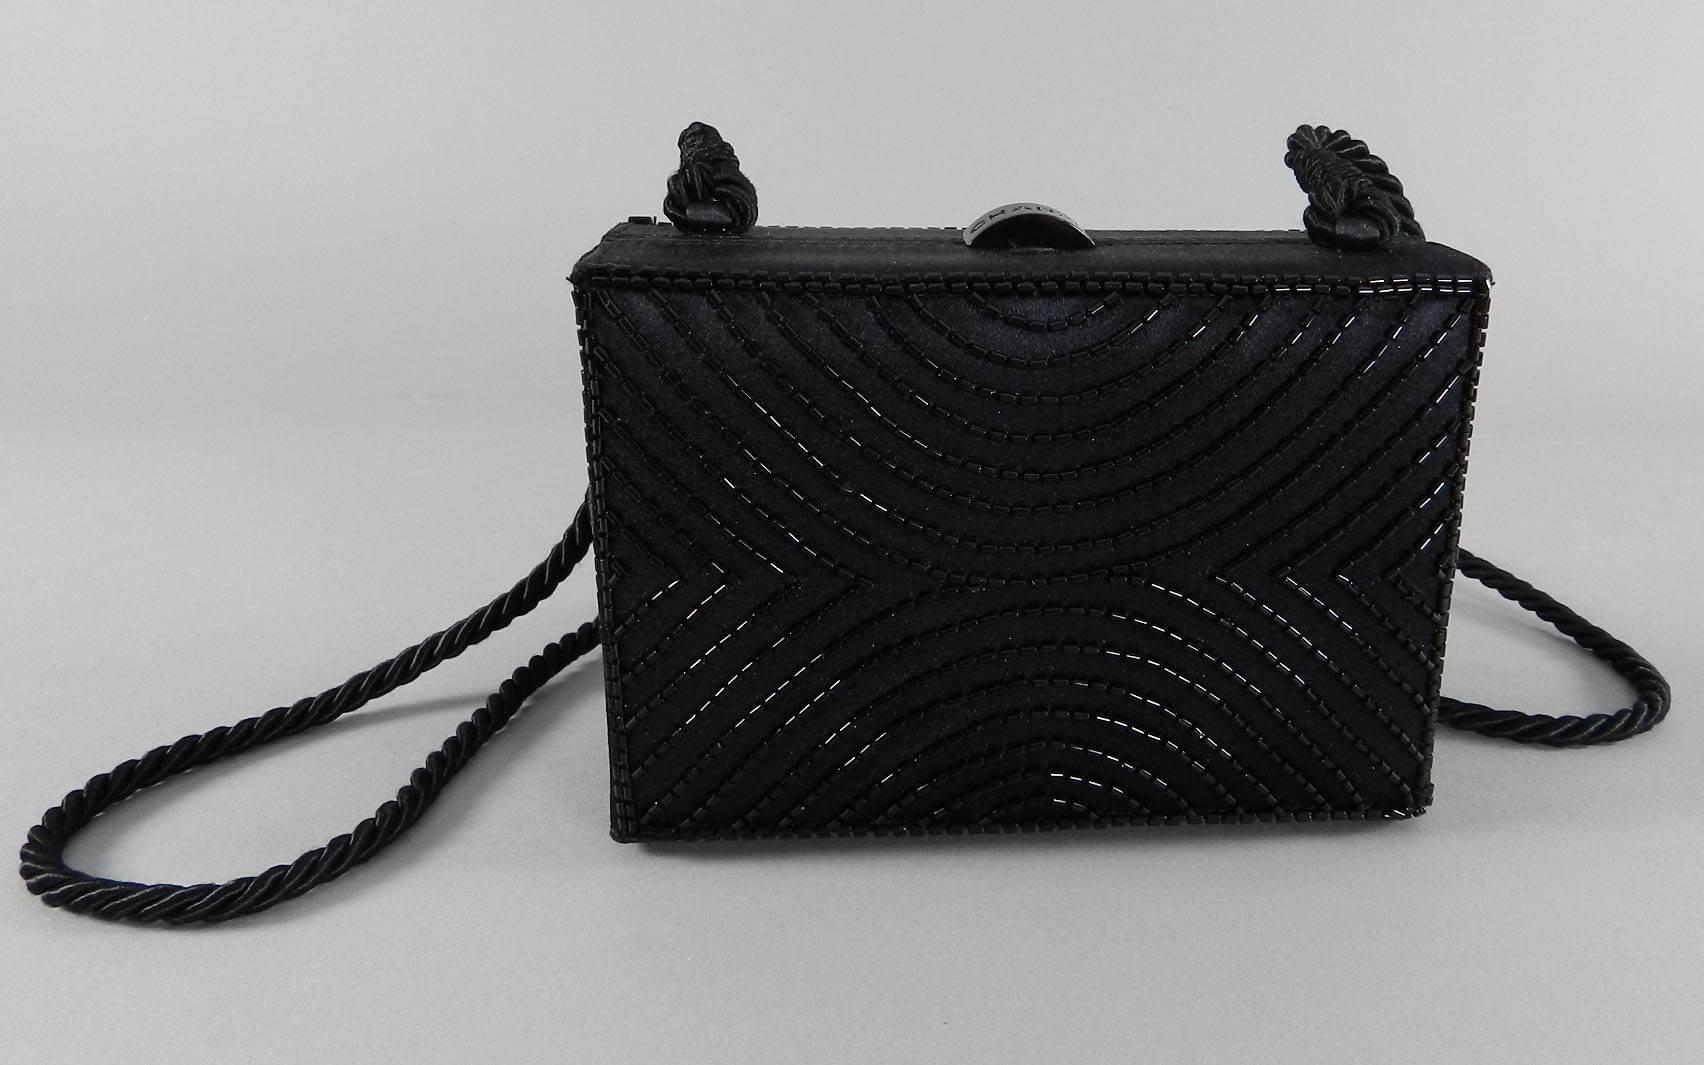 Chanel vintage small black satin beaded evening box bag. Long cross body cord strap. Date code for 1997-1999. Measures 6 x 4 x 2